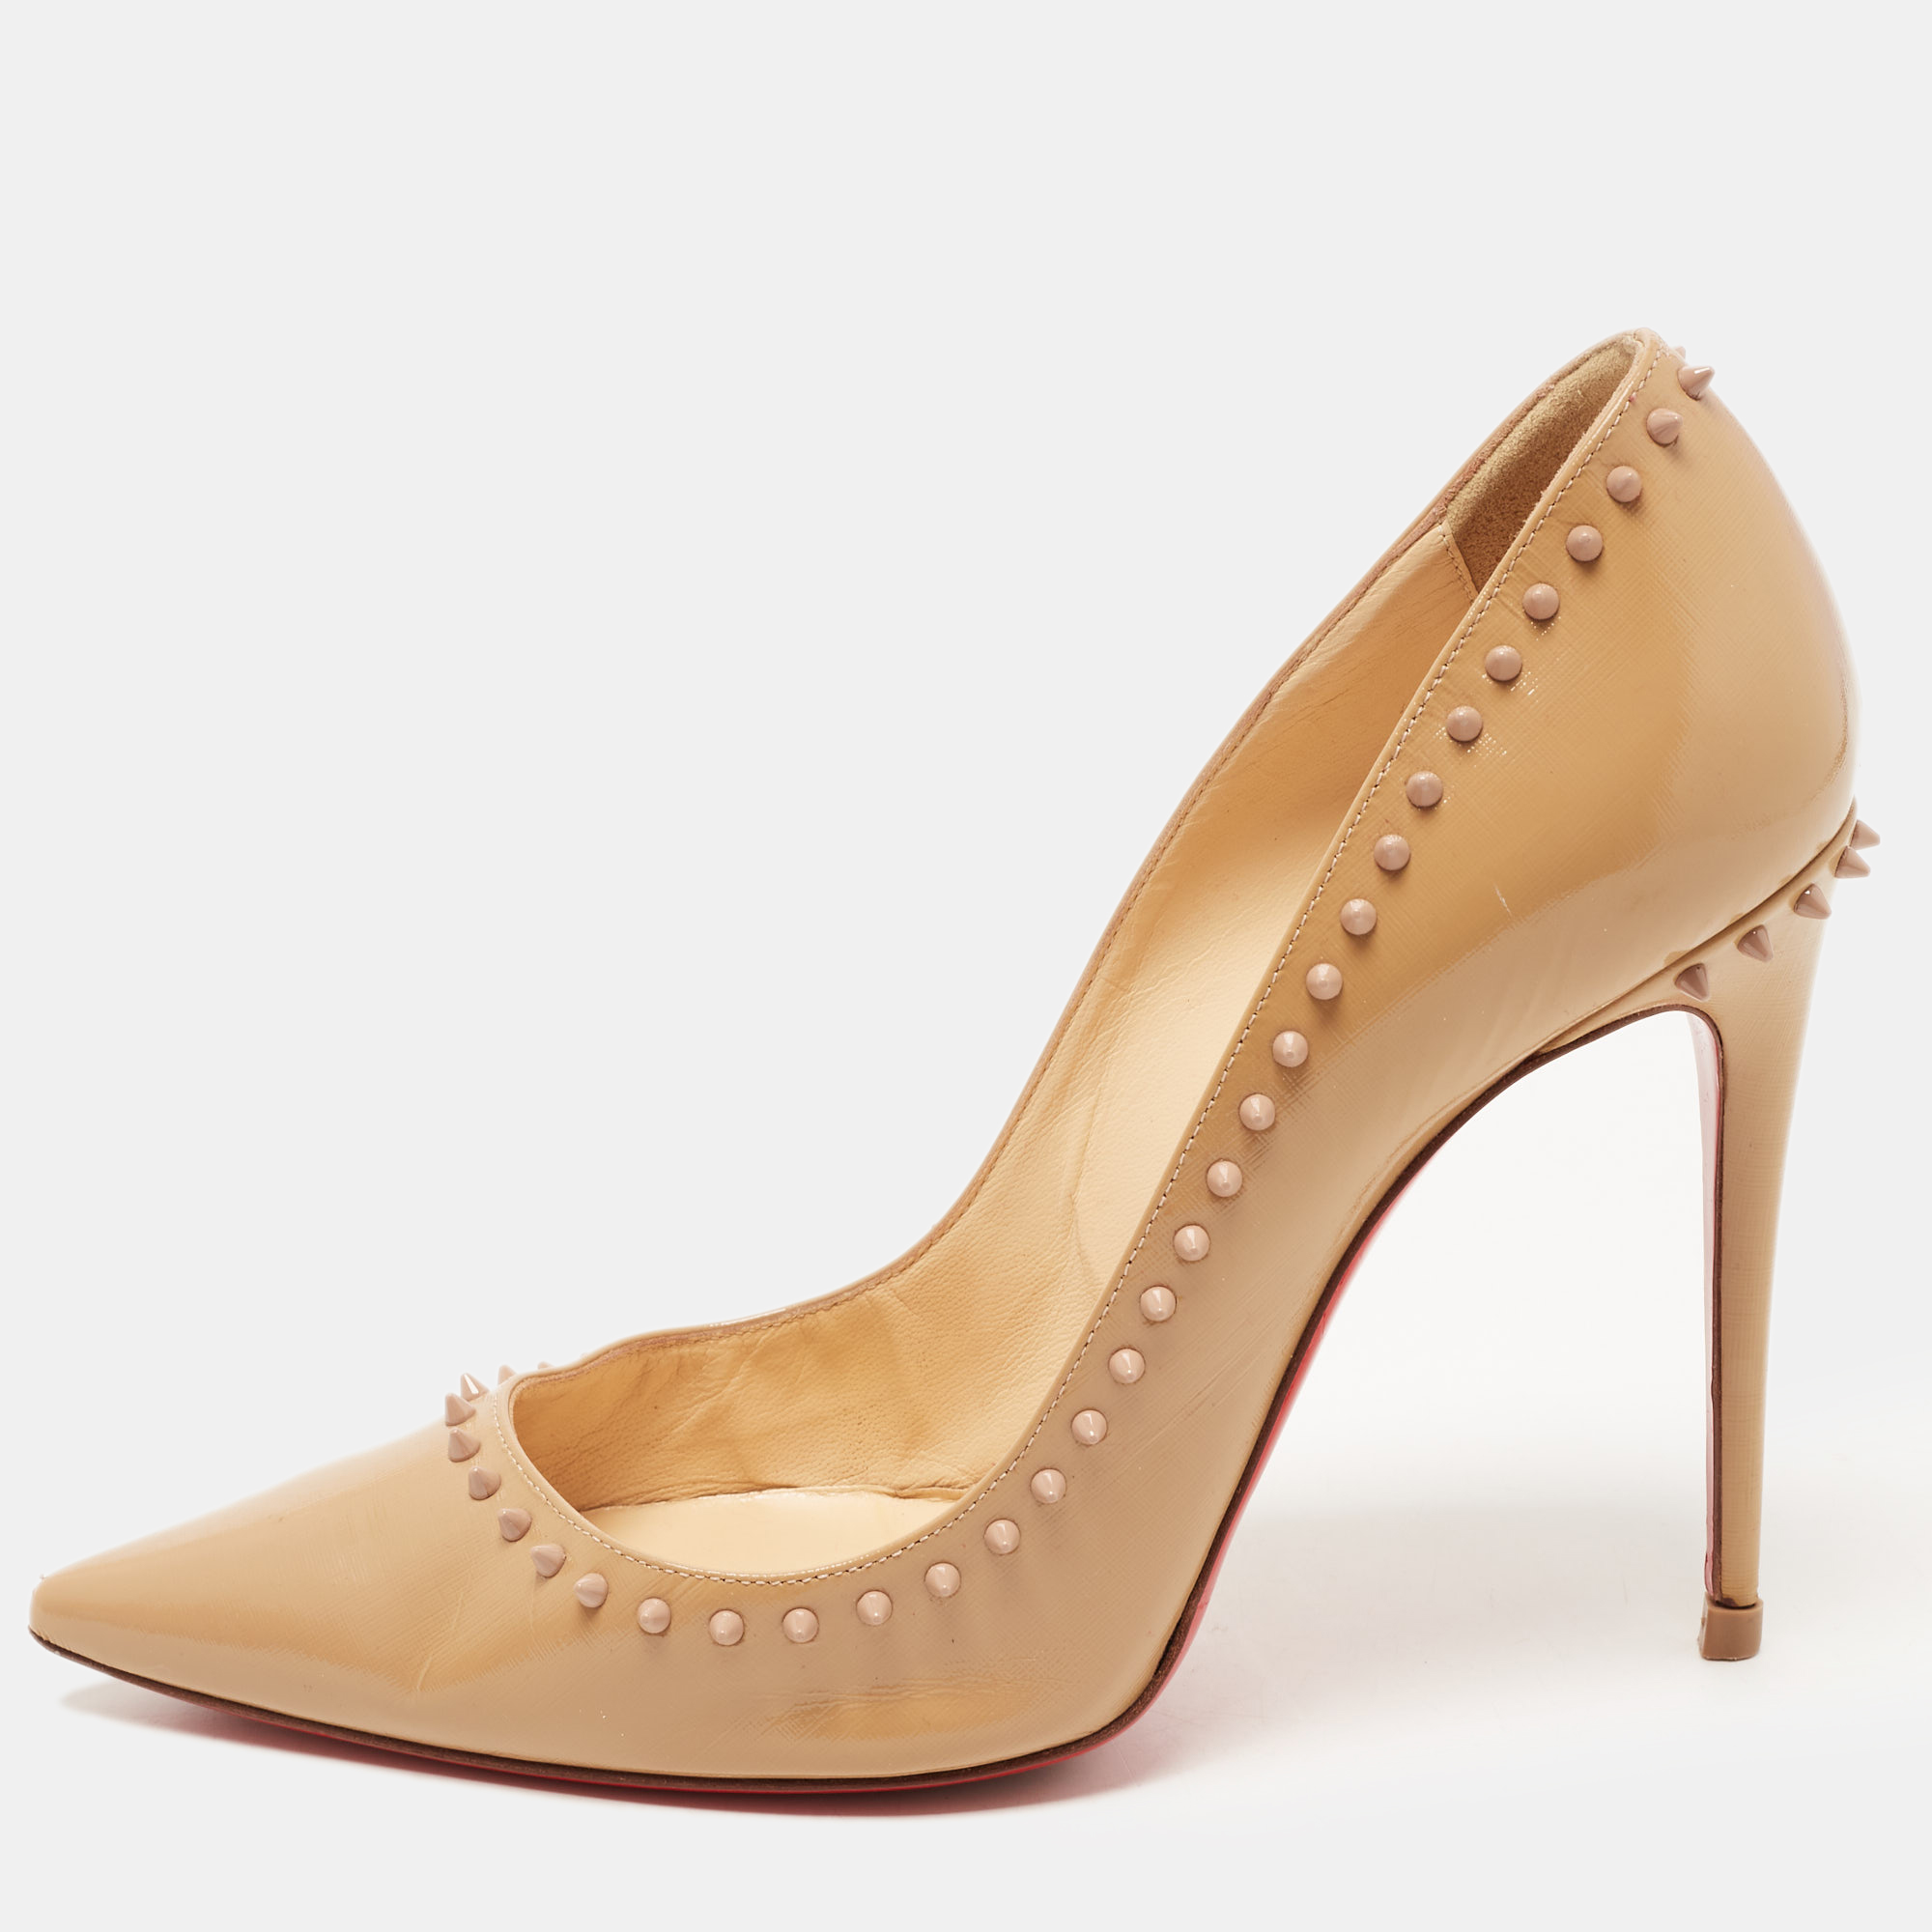 Christian Louboutin Beige Patent Leather Anjalina Spike Pointed Toe Pumps Size 38.5